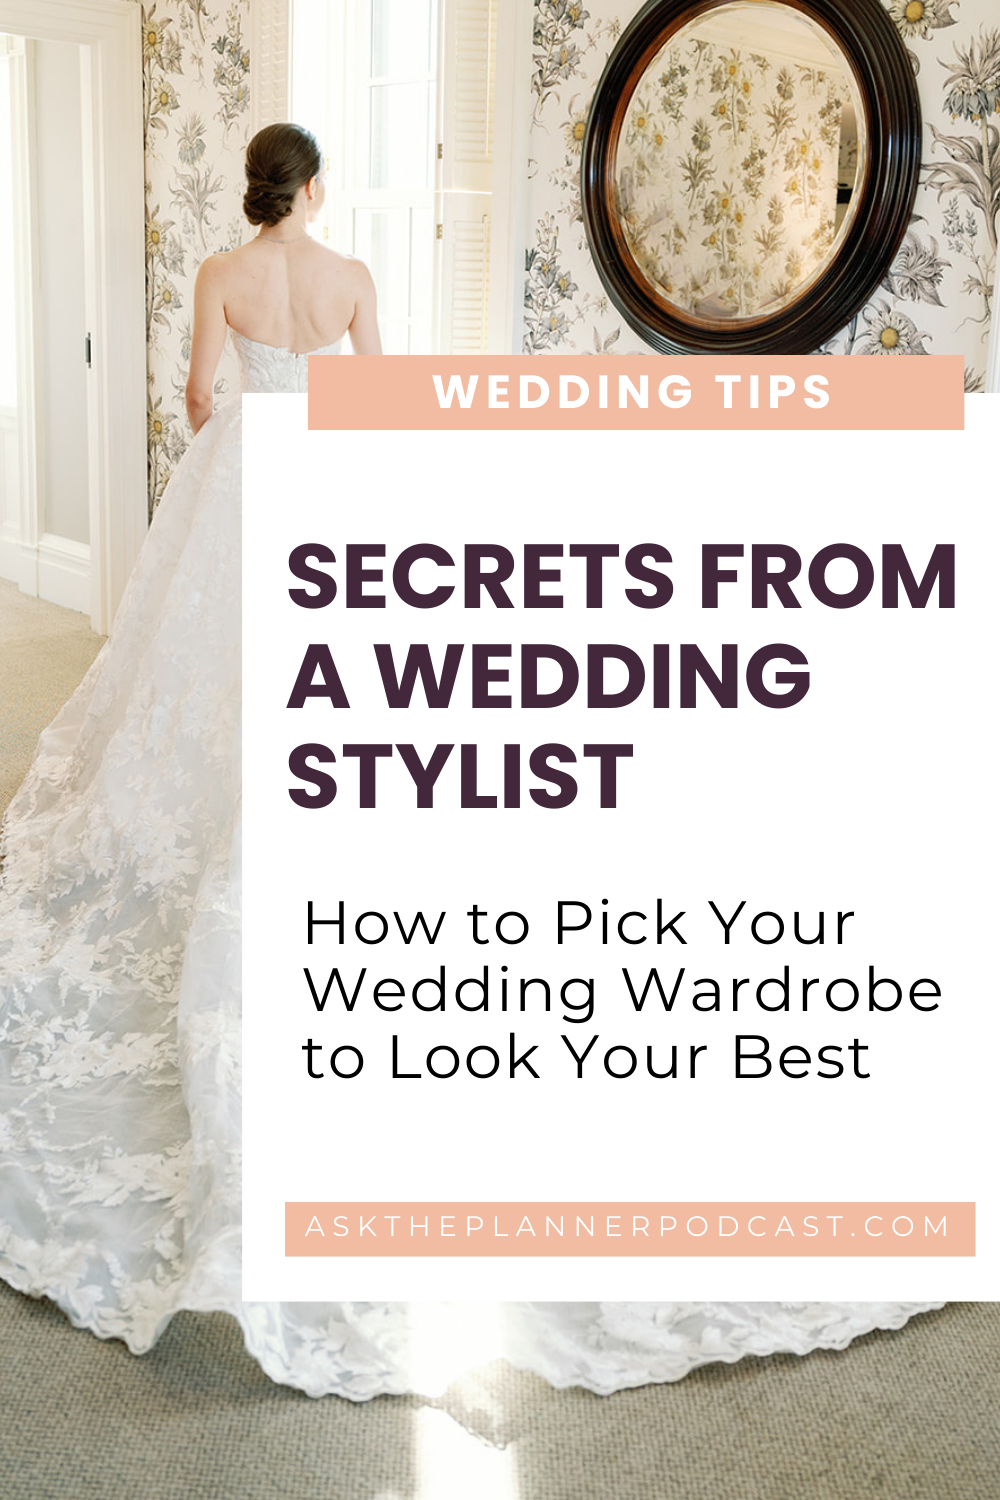 How to Pick Your Wedding Wardrobe to Look Your Best